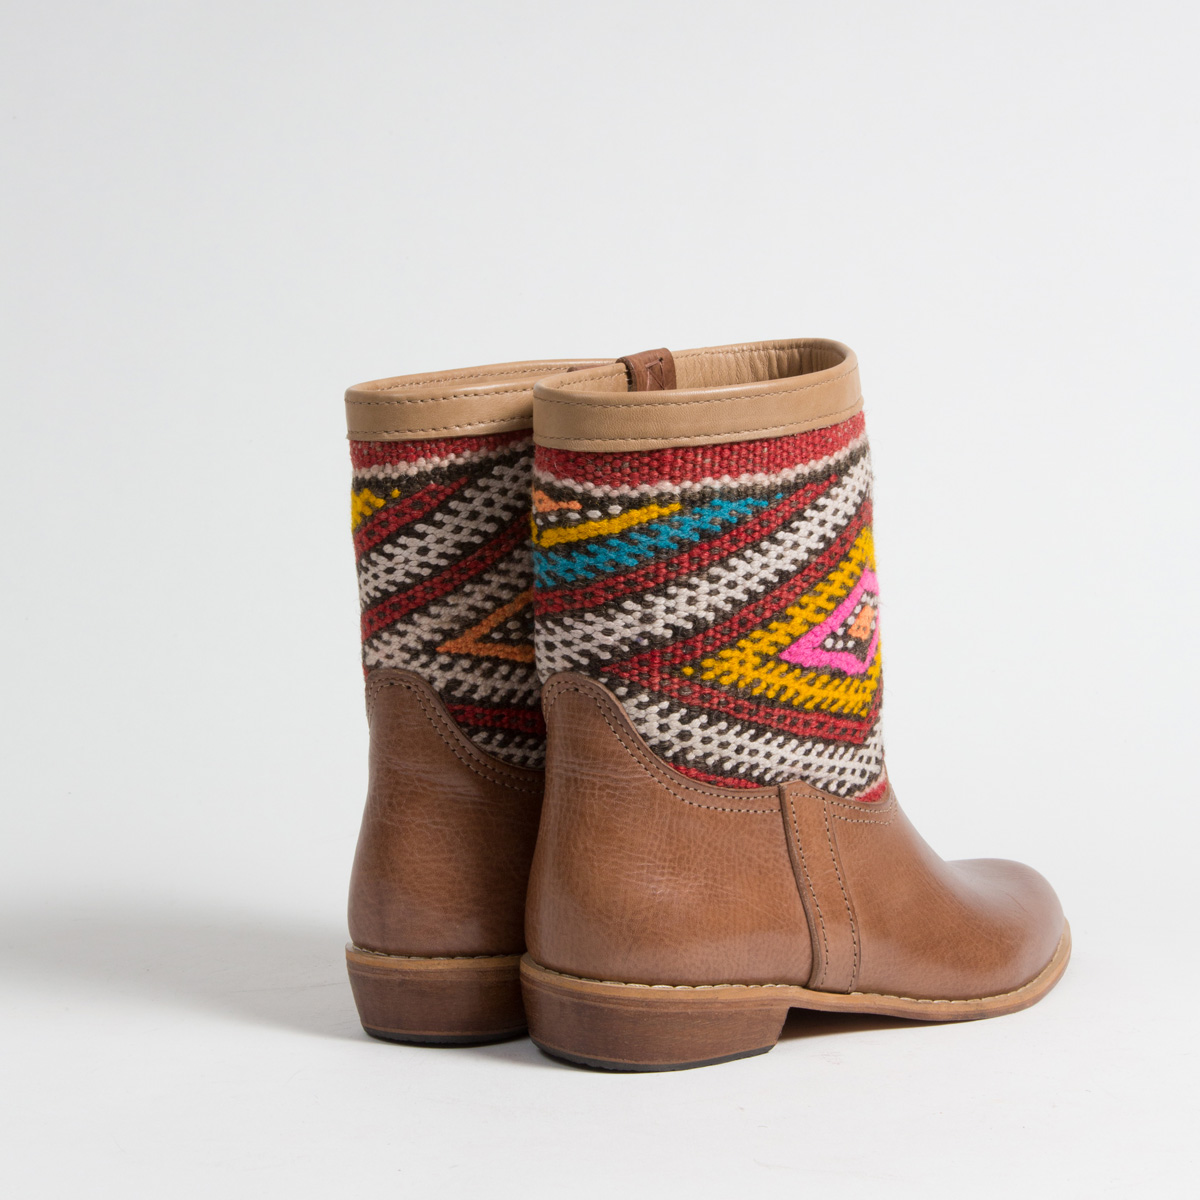 Bottines Kilim cuir mababouche artisanales (Réf. MCH5-40)